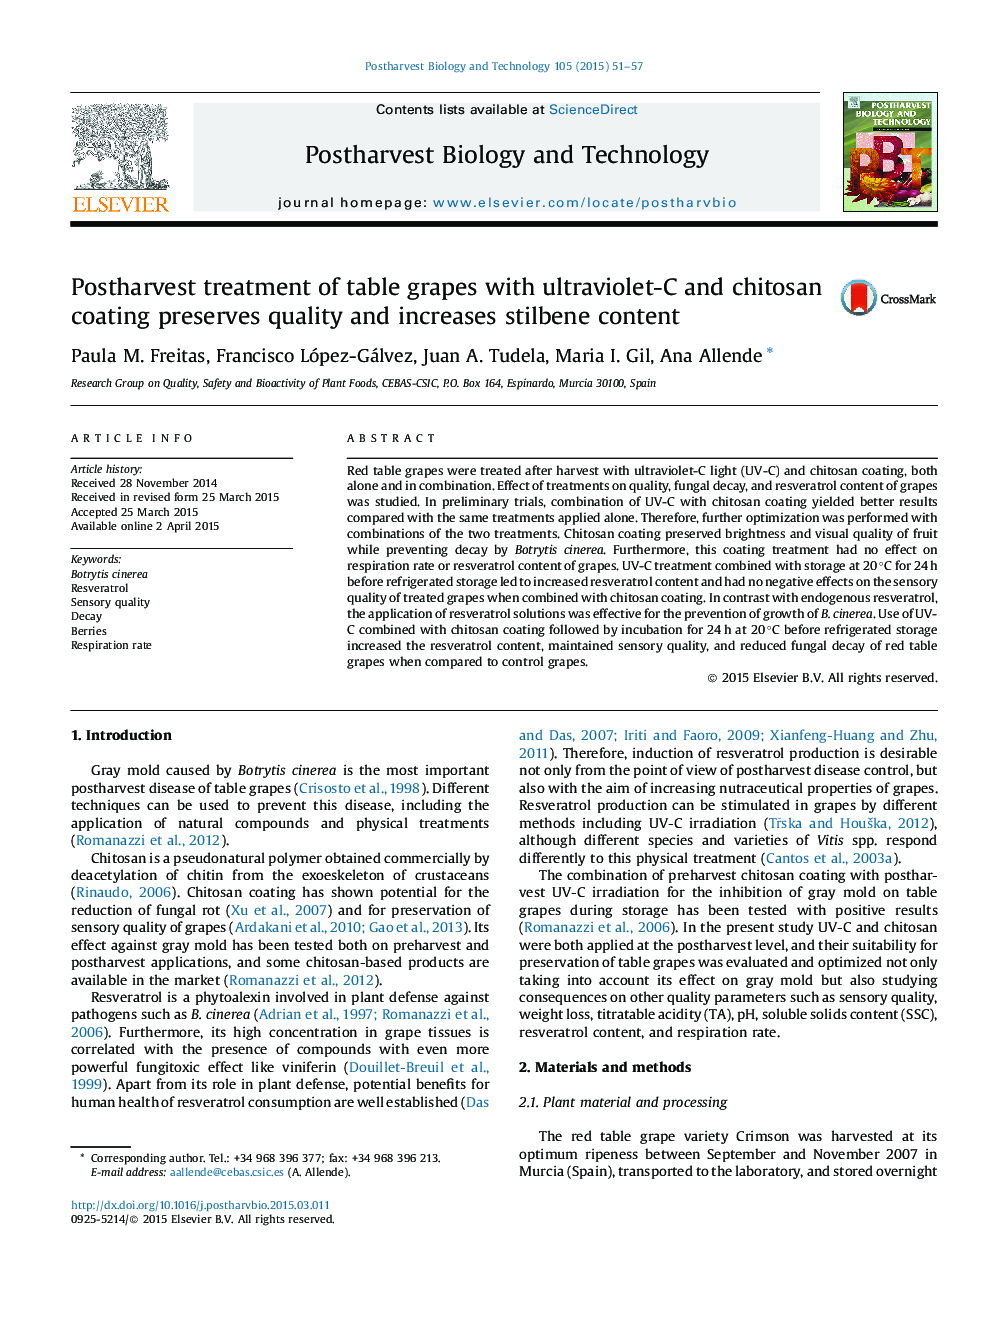 Postharvest treatment of table grapes with ultraviolet-C and chitosan coating preserves quality and increases stilbene content